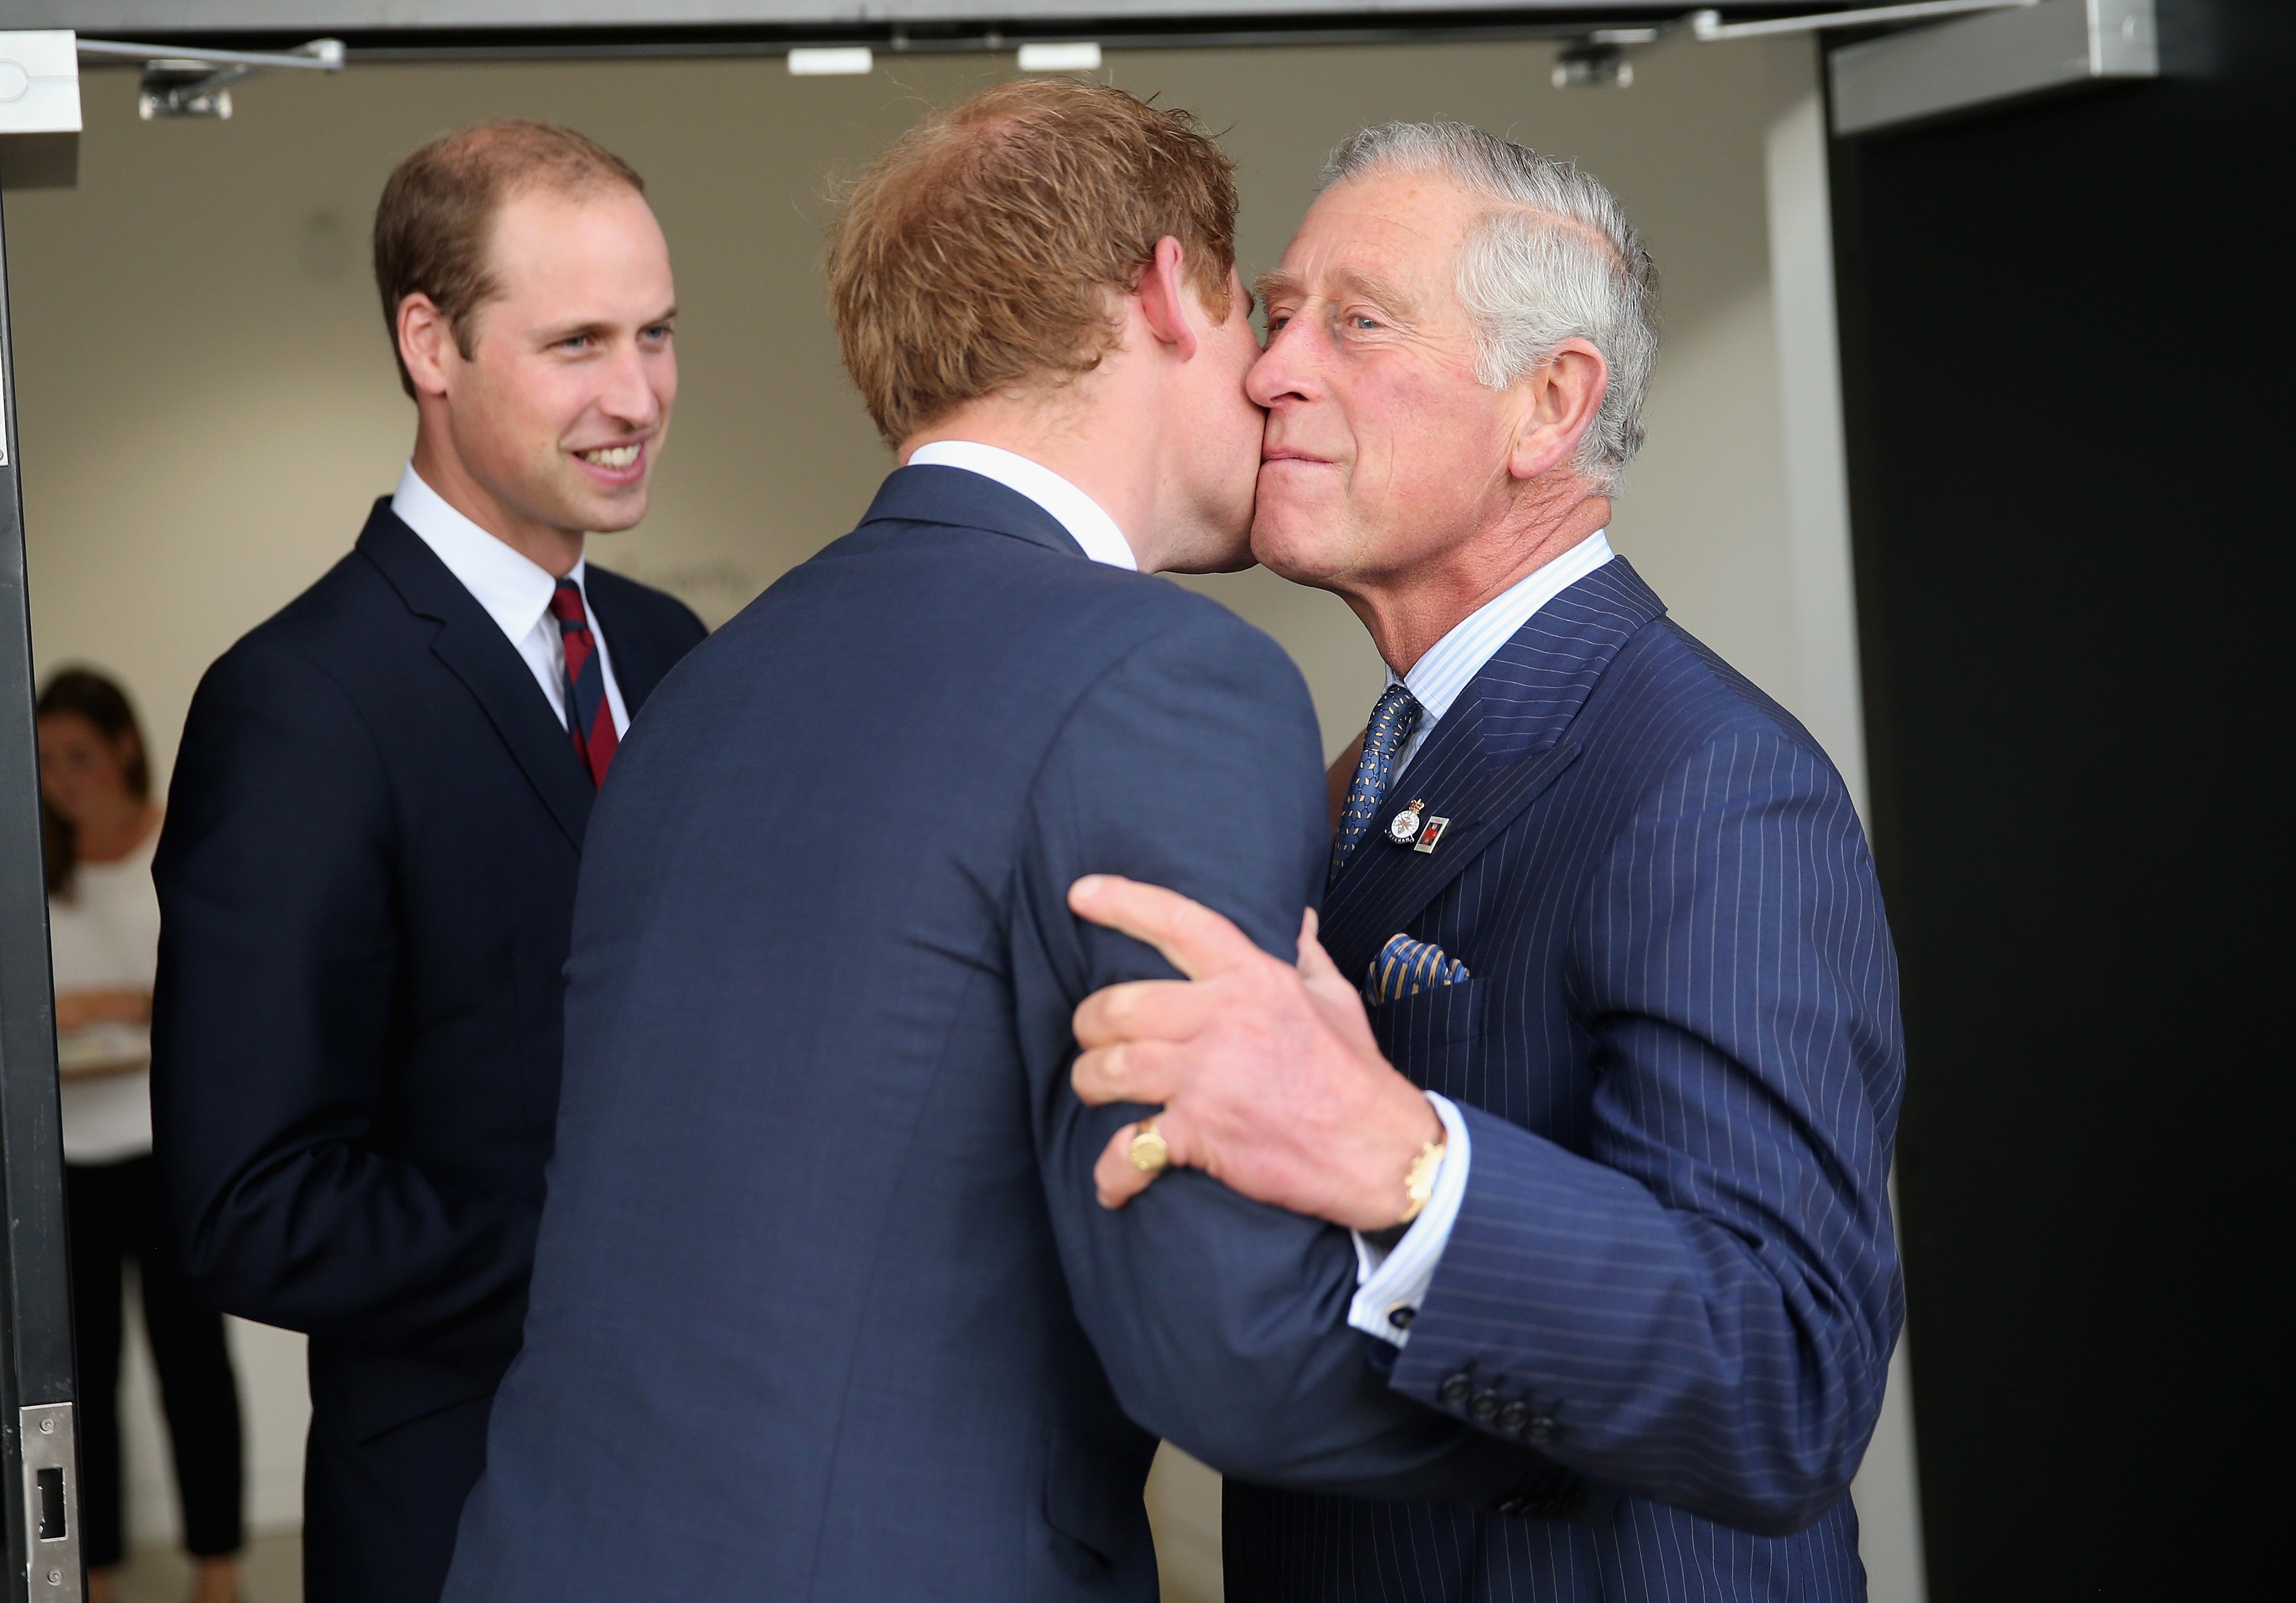 Prince Charles, Prince of Wales kisses his son Prince Harry as Prince William, Duke of Cambridge looks on at the Invictus Games Opening Ceremony at Queen Elizabeth II Park on September 10, 2014 in London, England. | Source: Getty Images